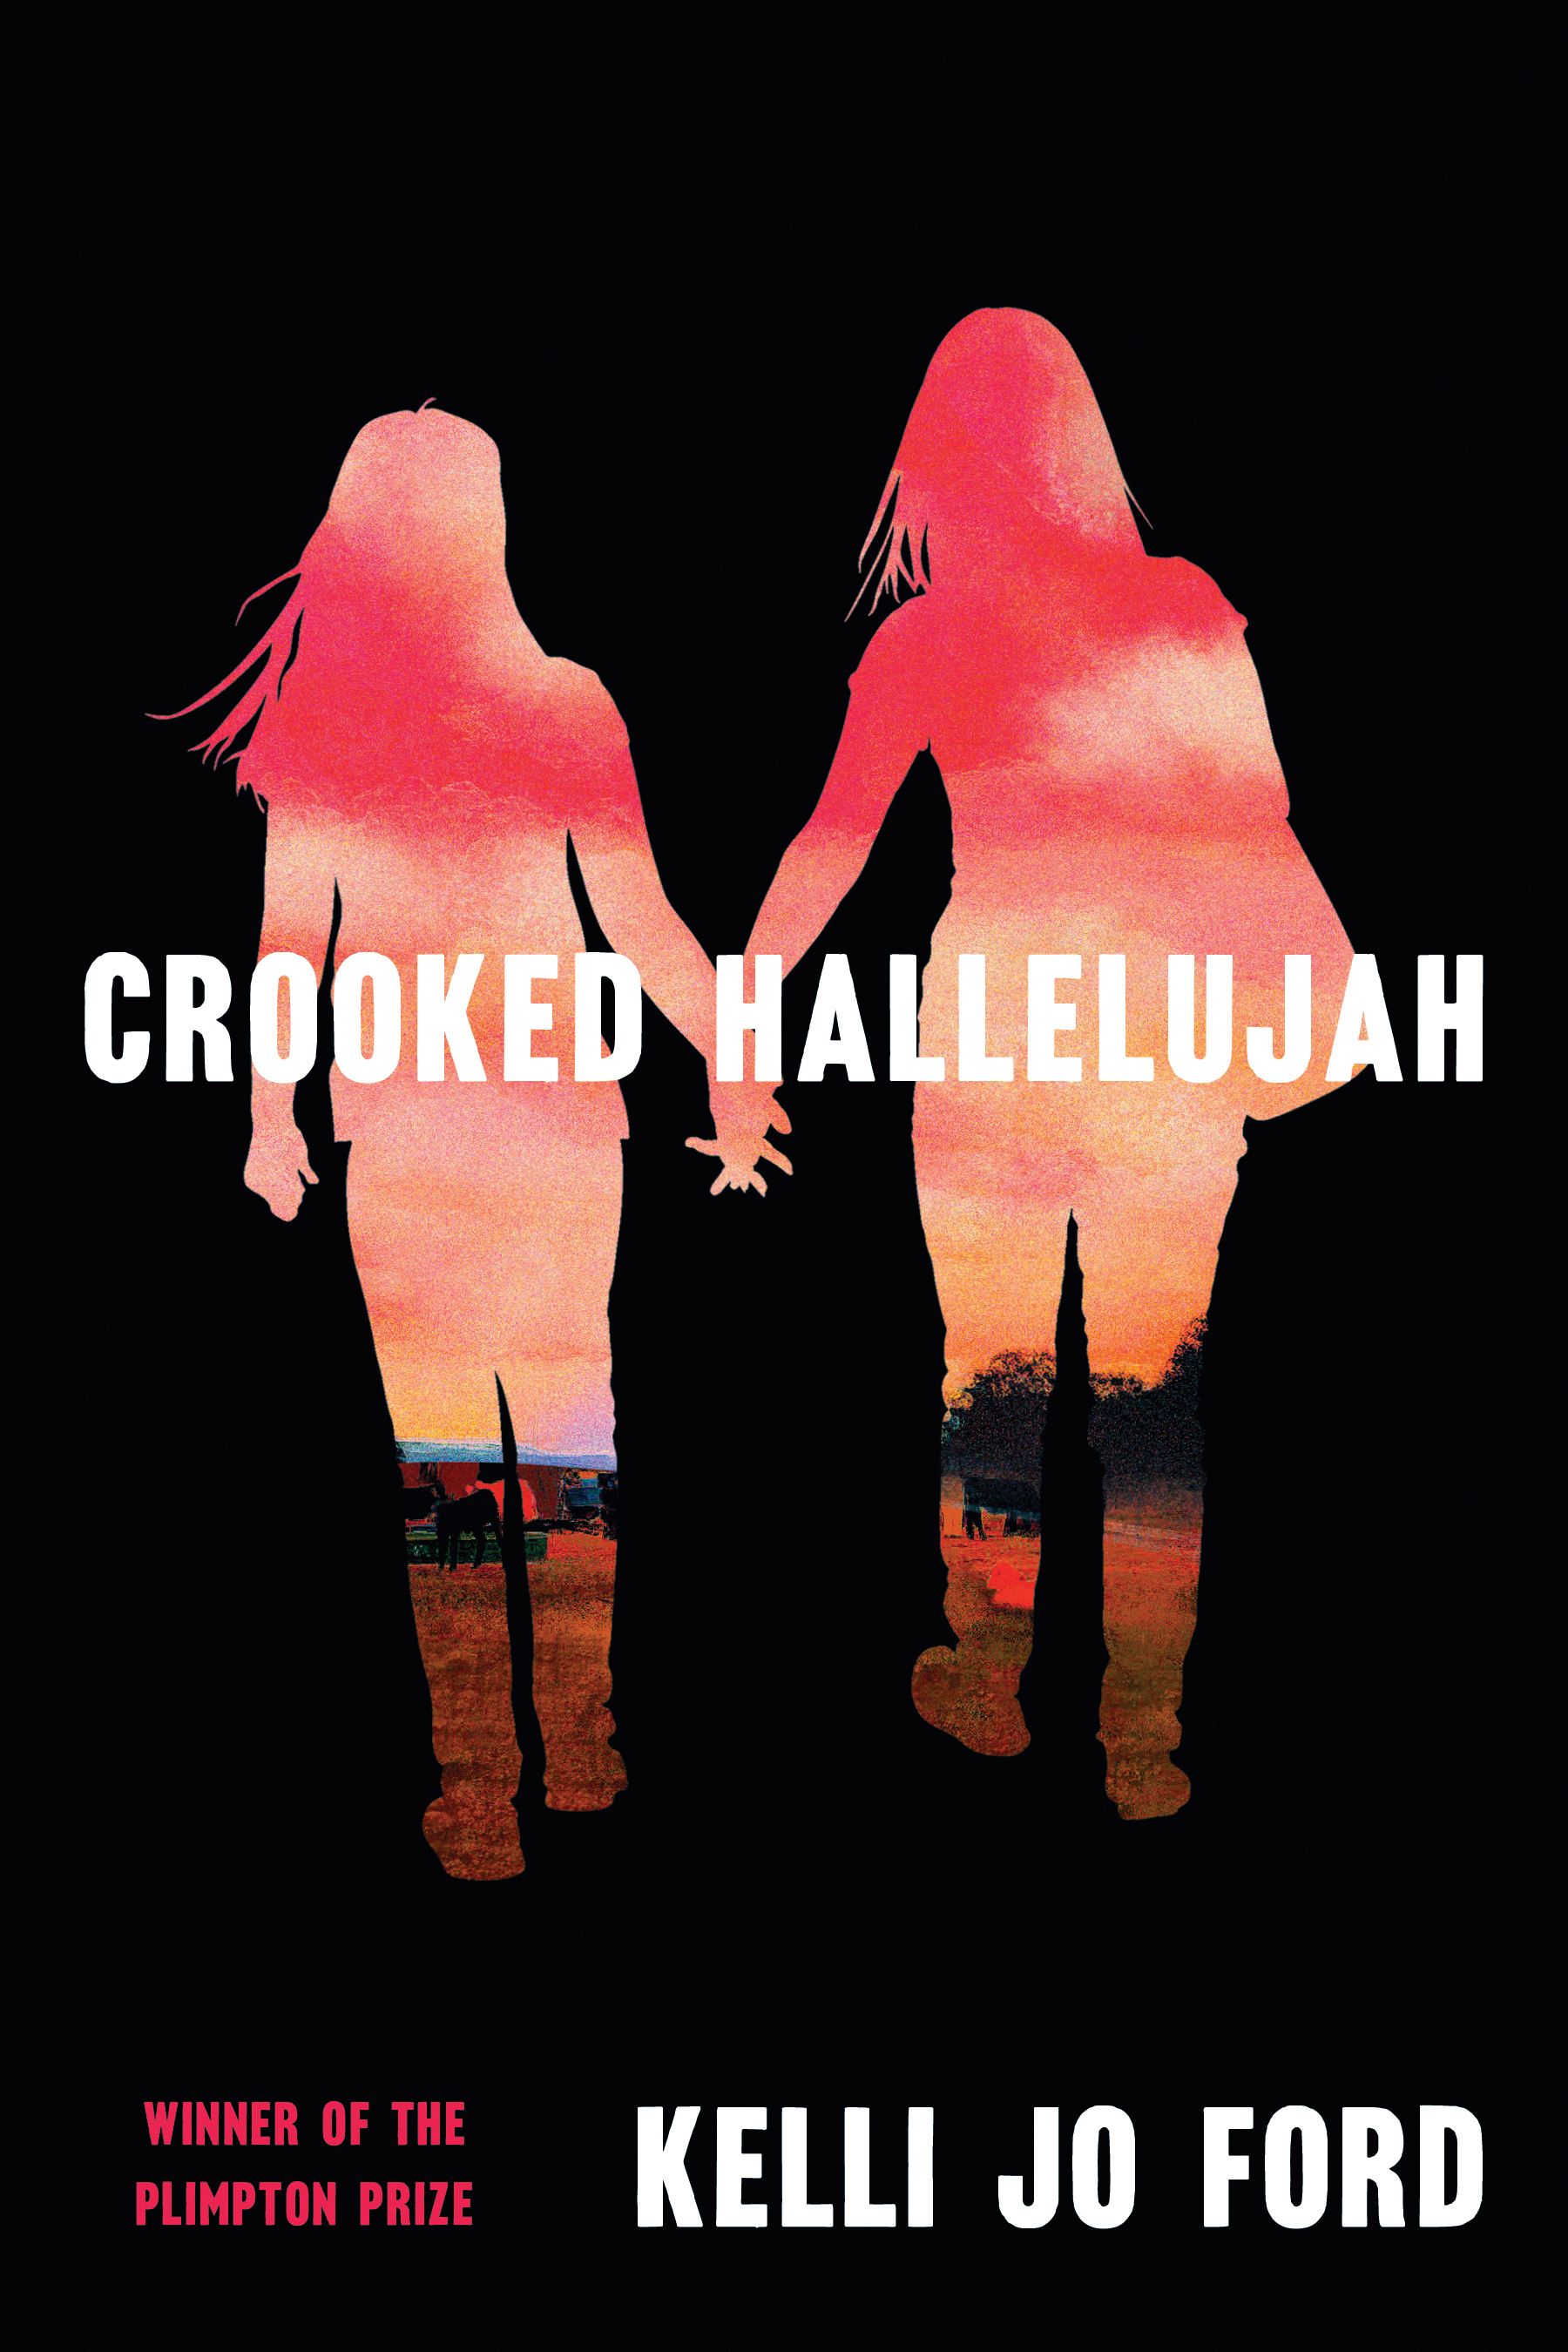 Cover of "Crooked Hallelujah," by Kelli Jo Ford